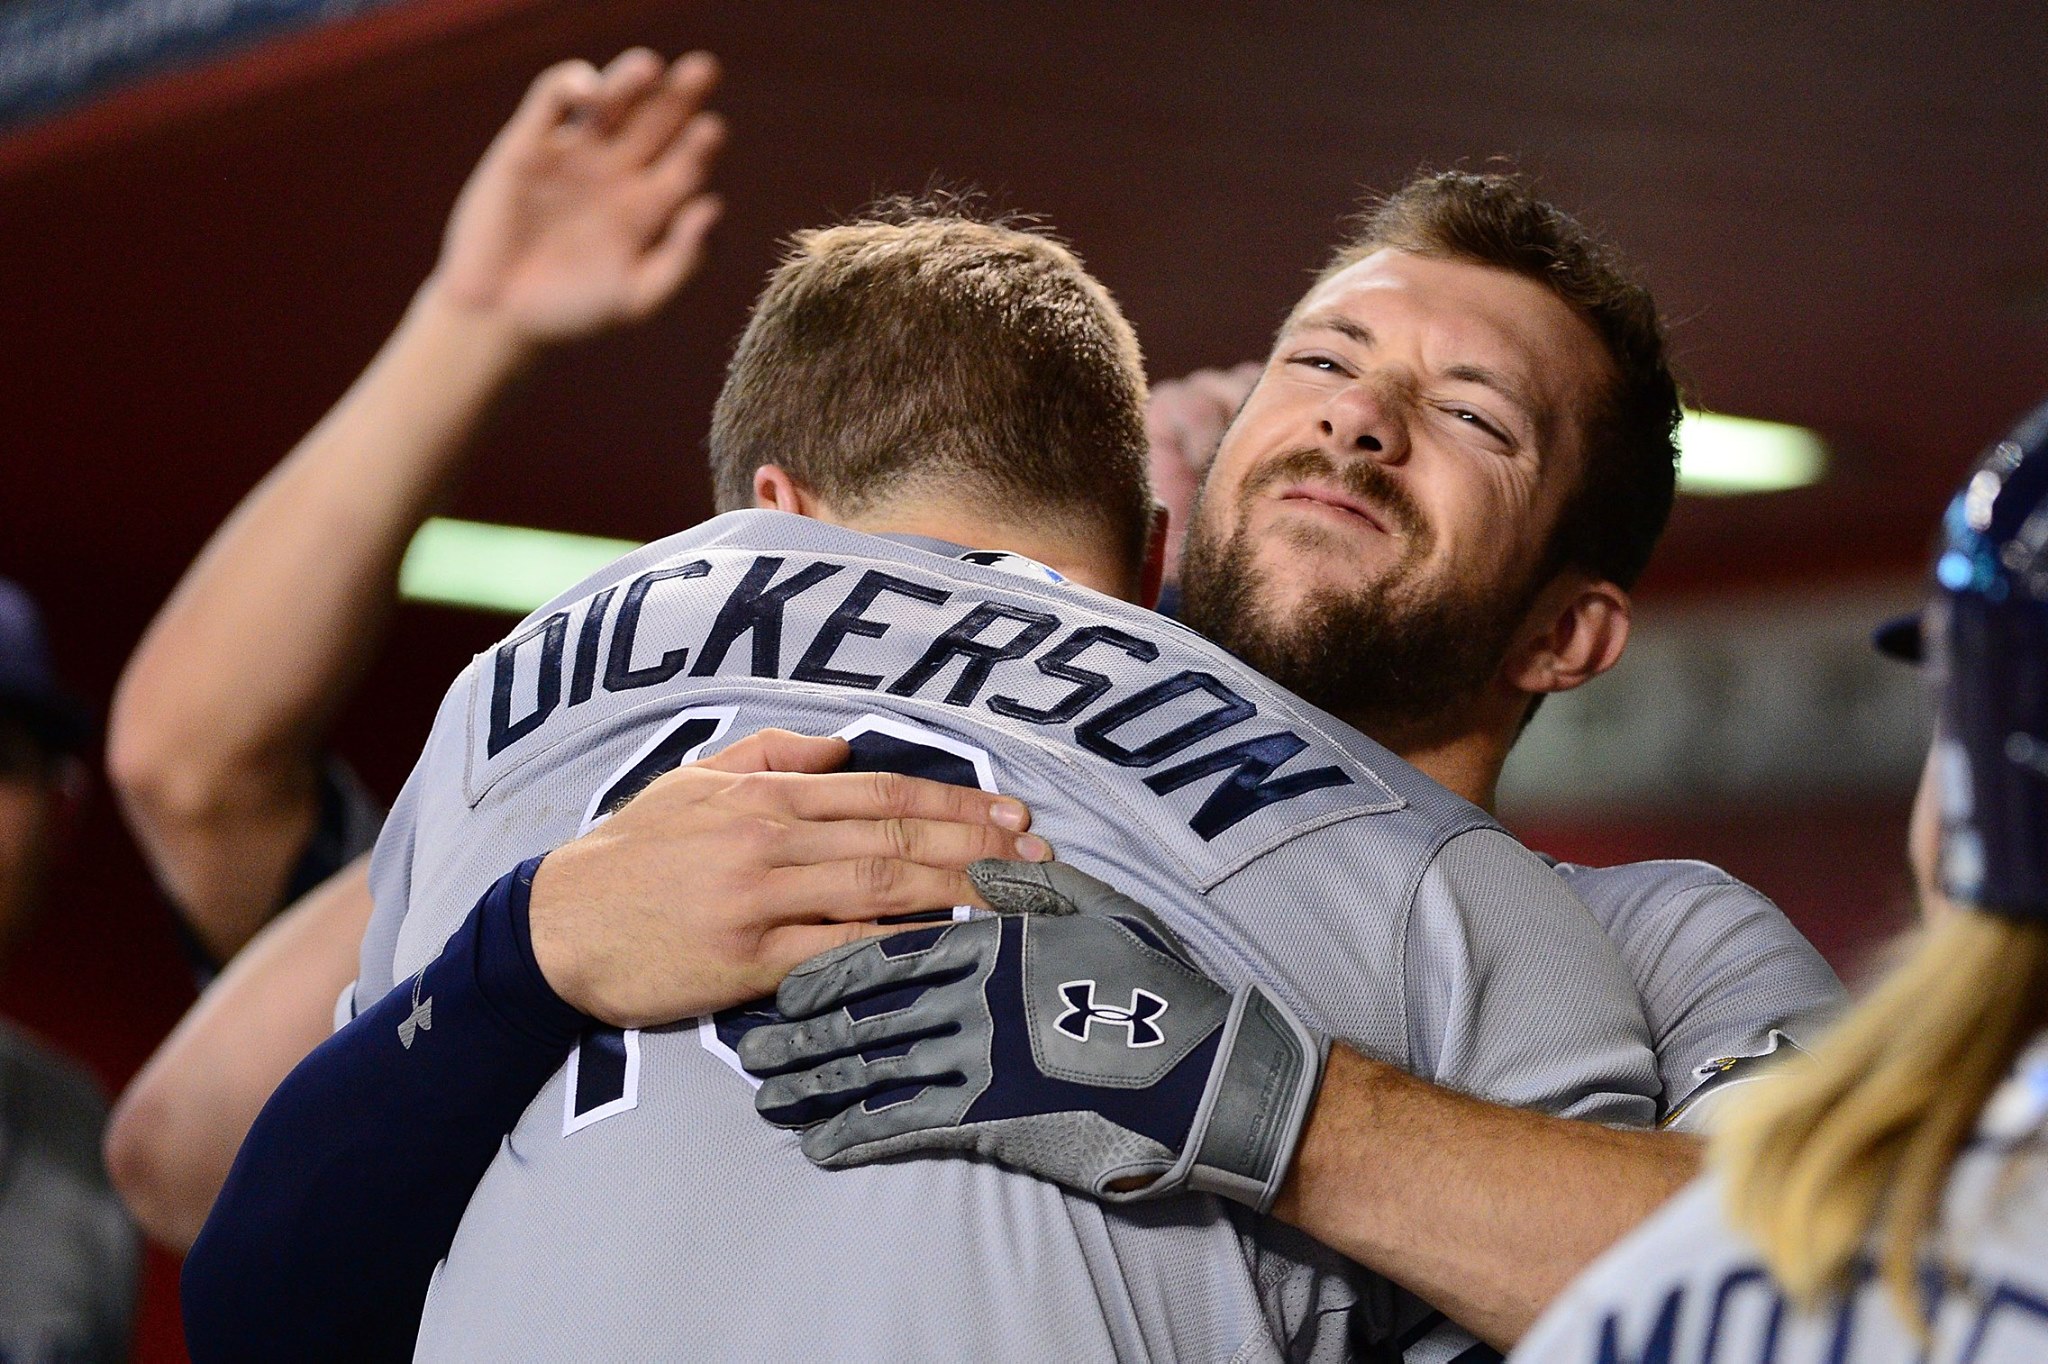 Corey Dickerson, enveloped by Steven Souza Jr., hit two homers in the series finale against the Arizona Diamondbacks. (Photo Credit: Tampa Bay Rays)